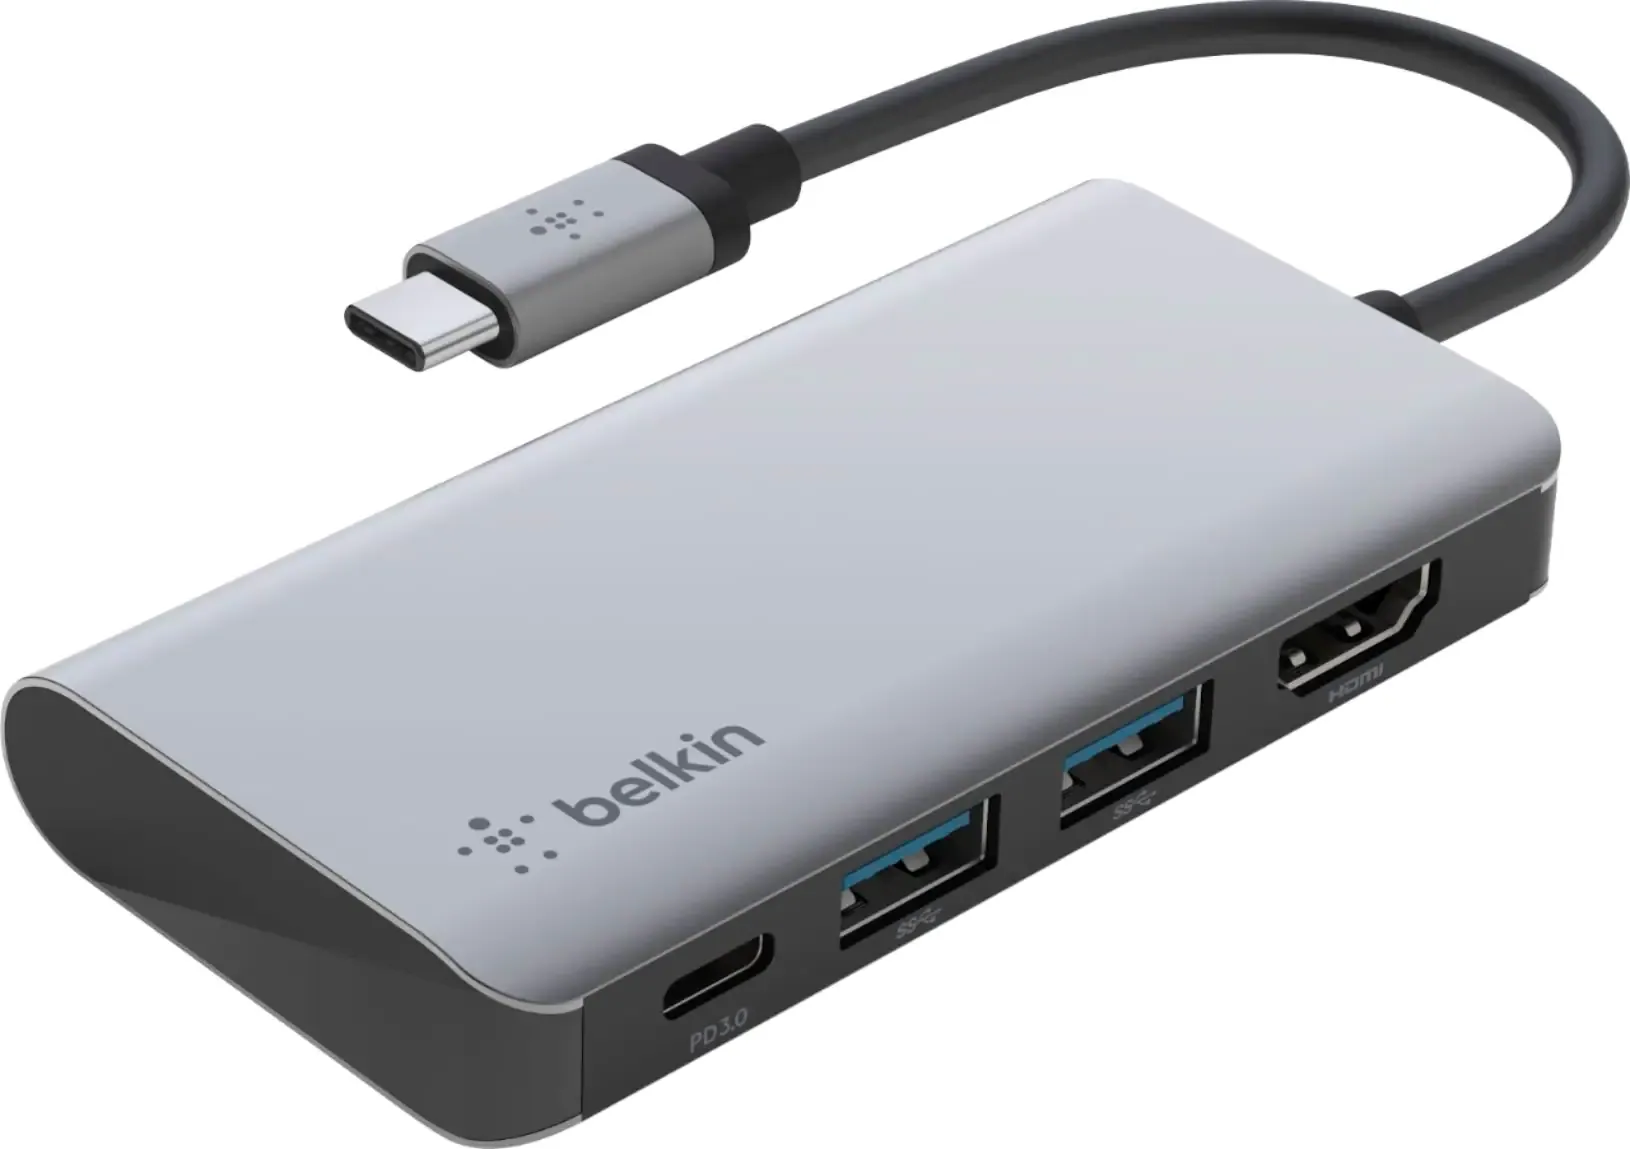 If you only need a couple of extra ports without spending a ton of money, this Belkin USB-C hub is a great option. It gives you two USB Type-A ports and HDMI, plus a USB Type-C port. This is a great compact option you can easily take anywhere, and it's also one of the more affordable options around.